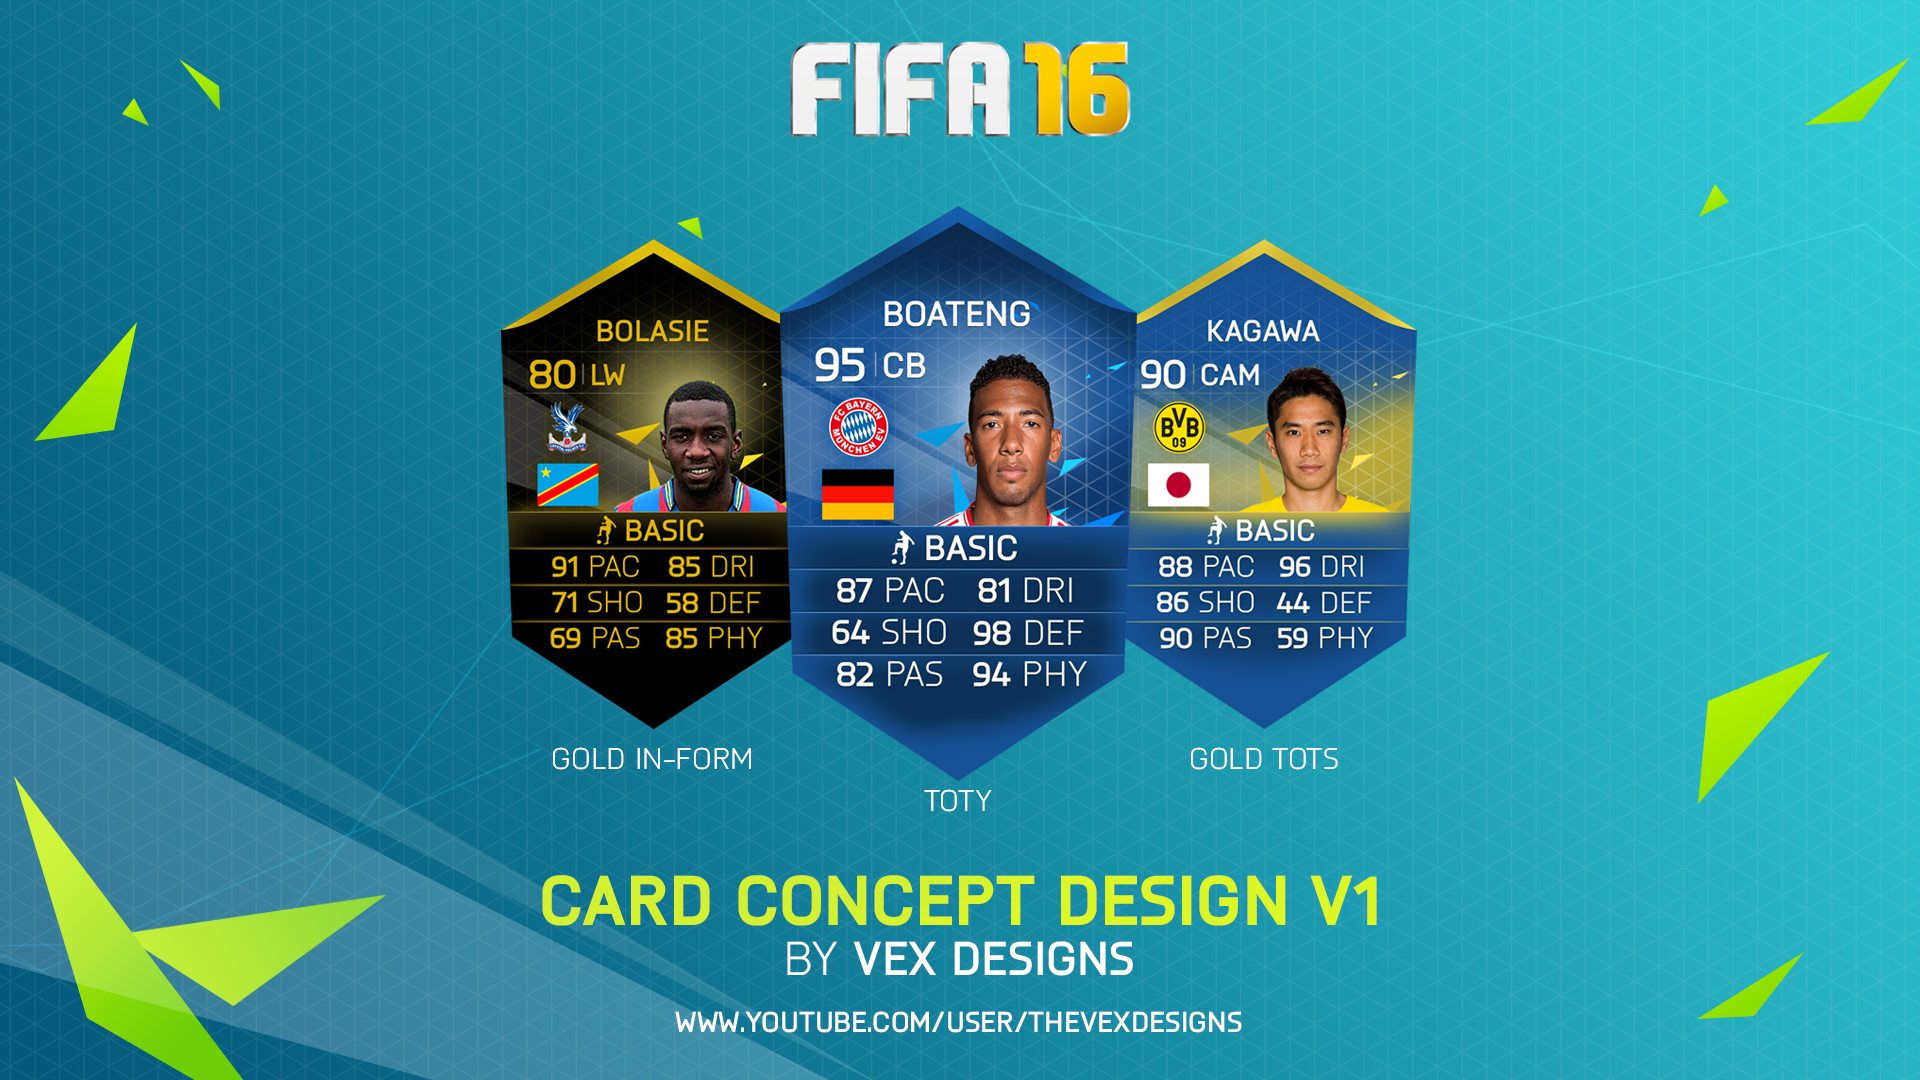 The Best Fifa 16 Team - Fifa Ultimate Team Card Concept - HD Wallpaper 